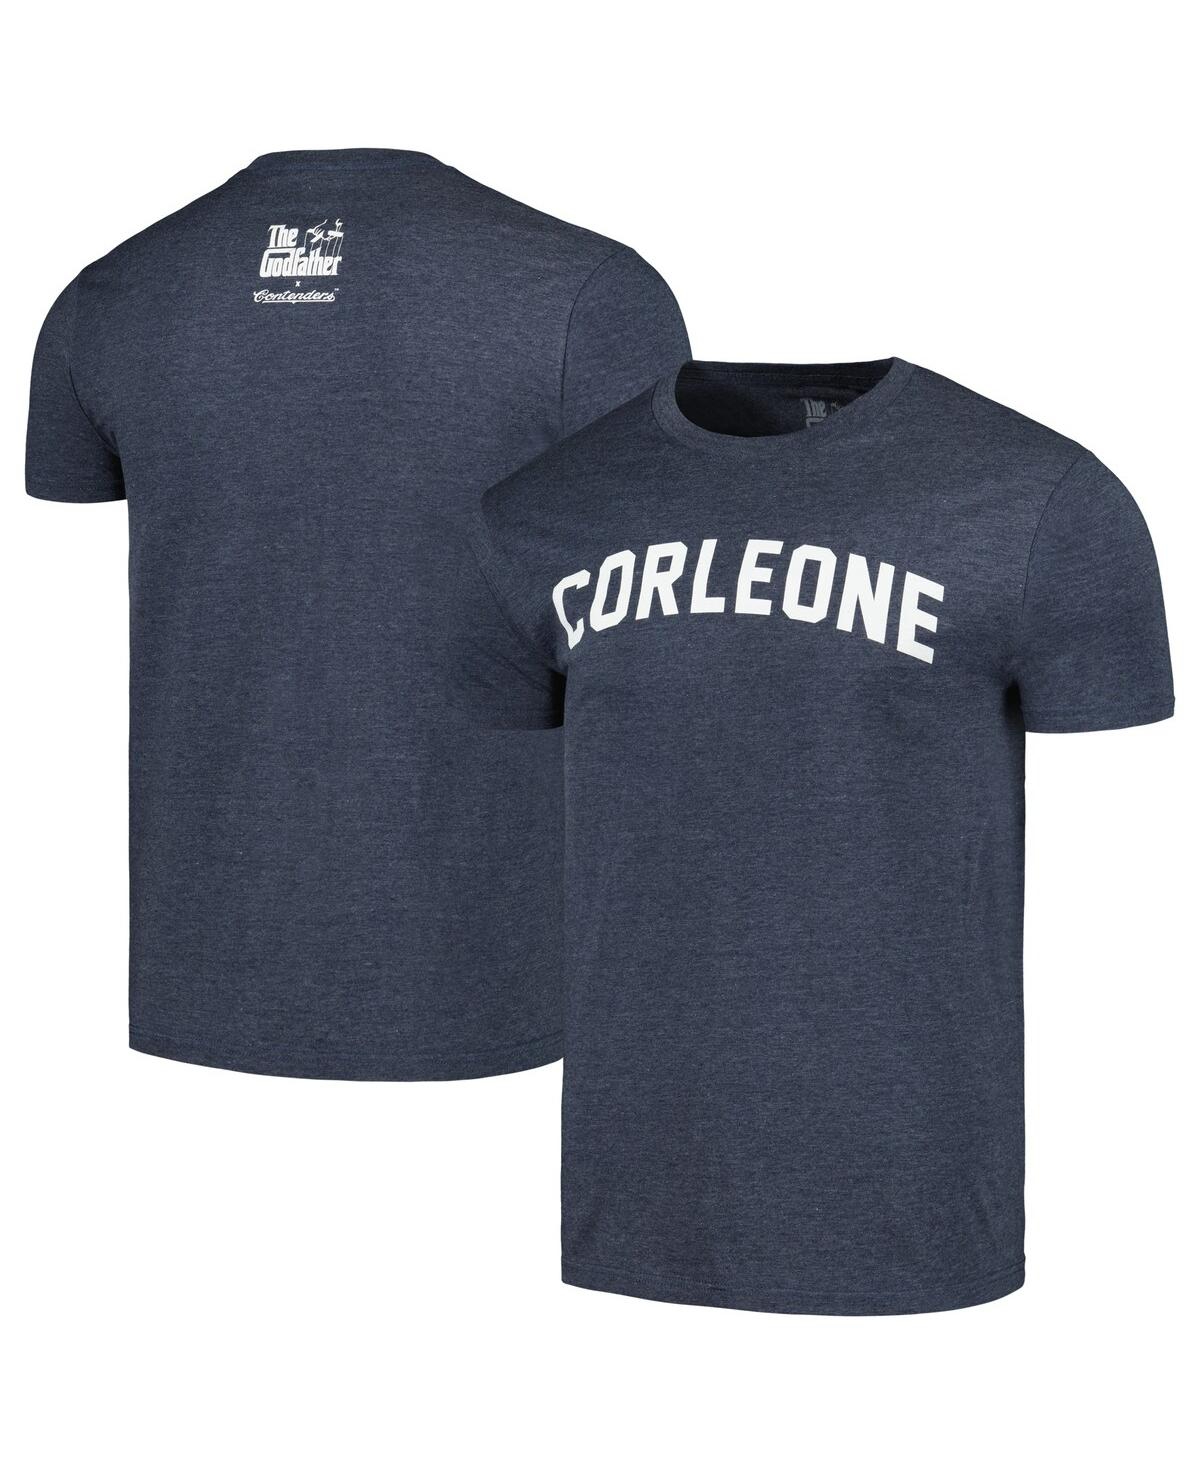 Contenders Clothing Men's  Heather Navy The Godfather Corleone T-shirt